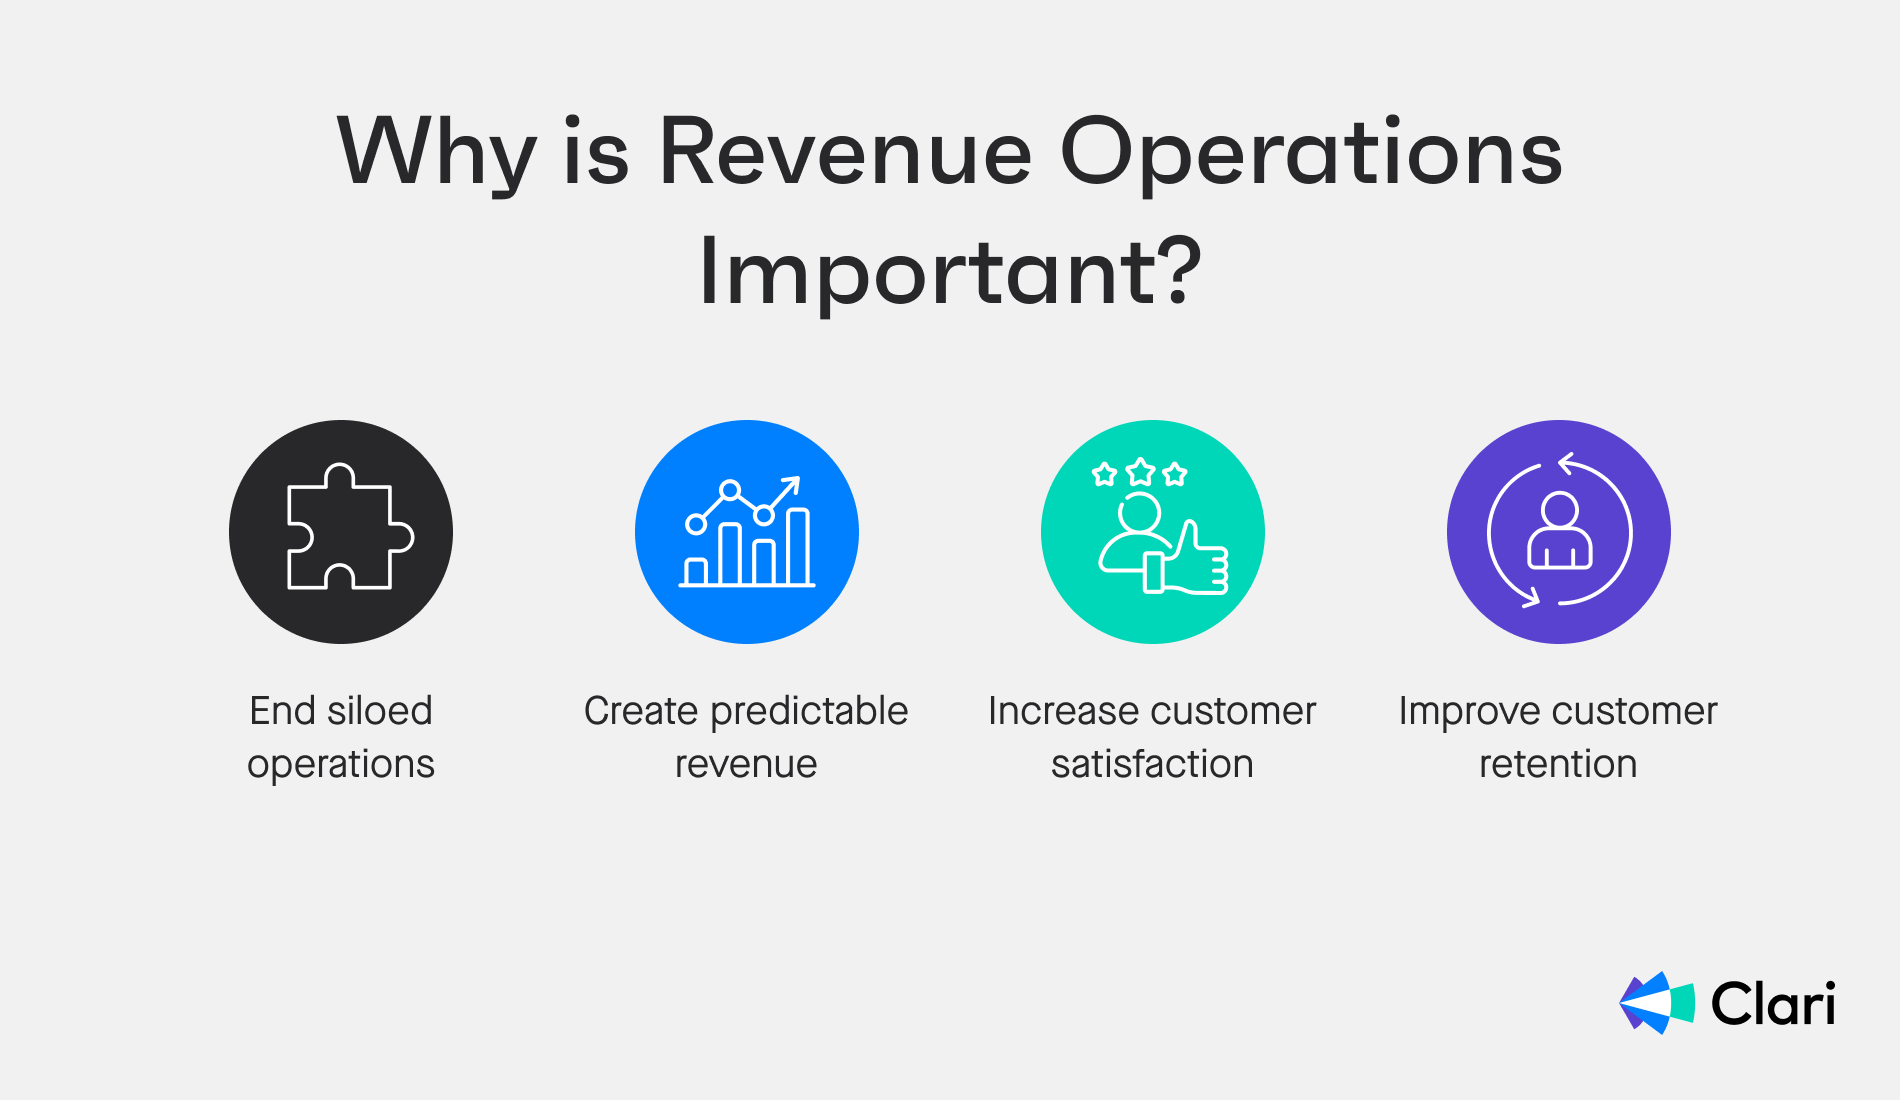 Image listing the reasons why revenue operations important